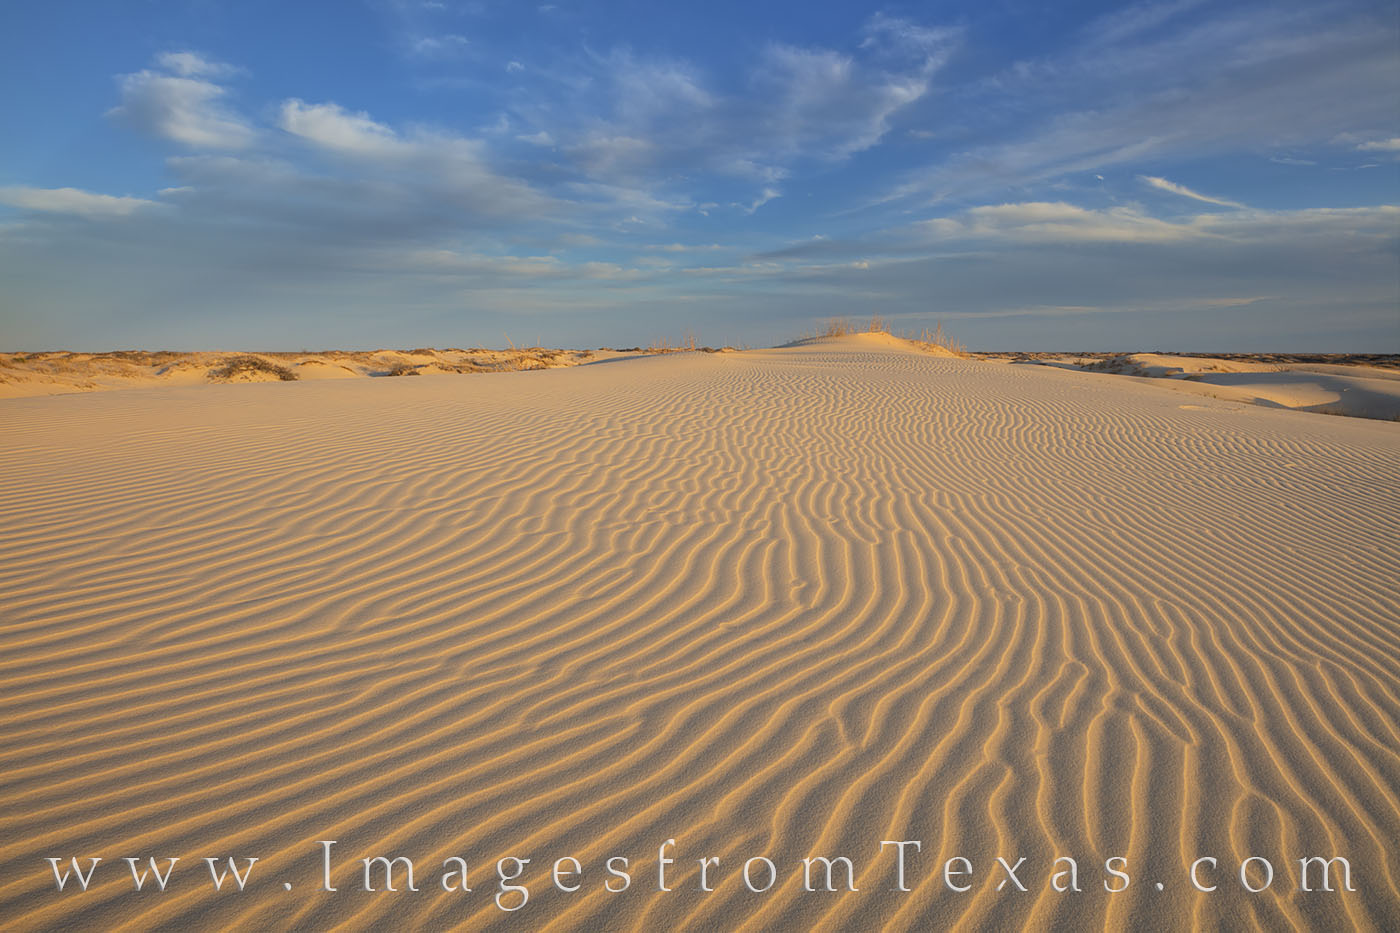 As the sun falls lower in the sky, the lines and textures of sand at Sandhills State Park near Monahans become more evident....